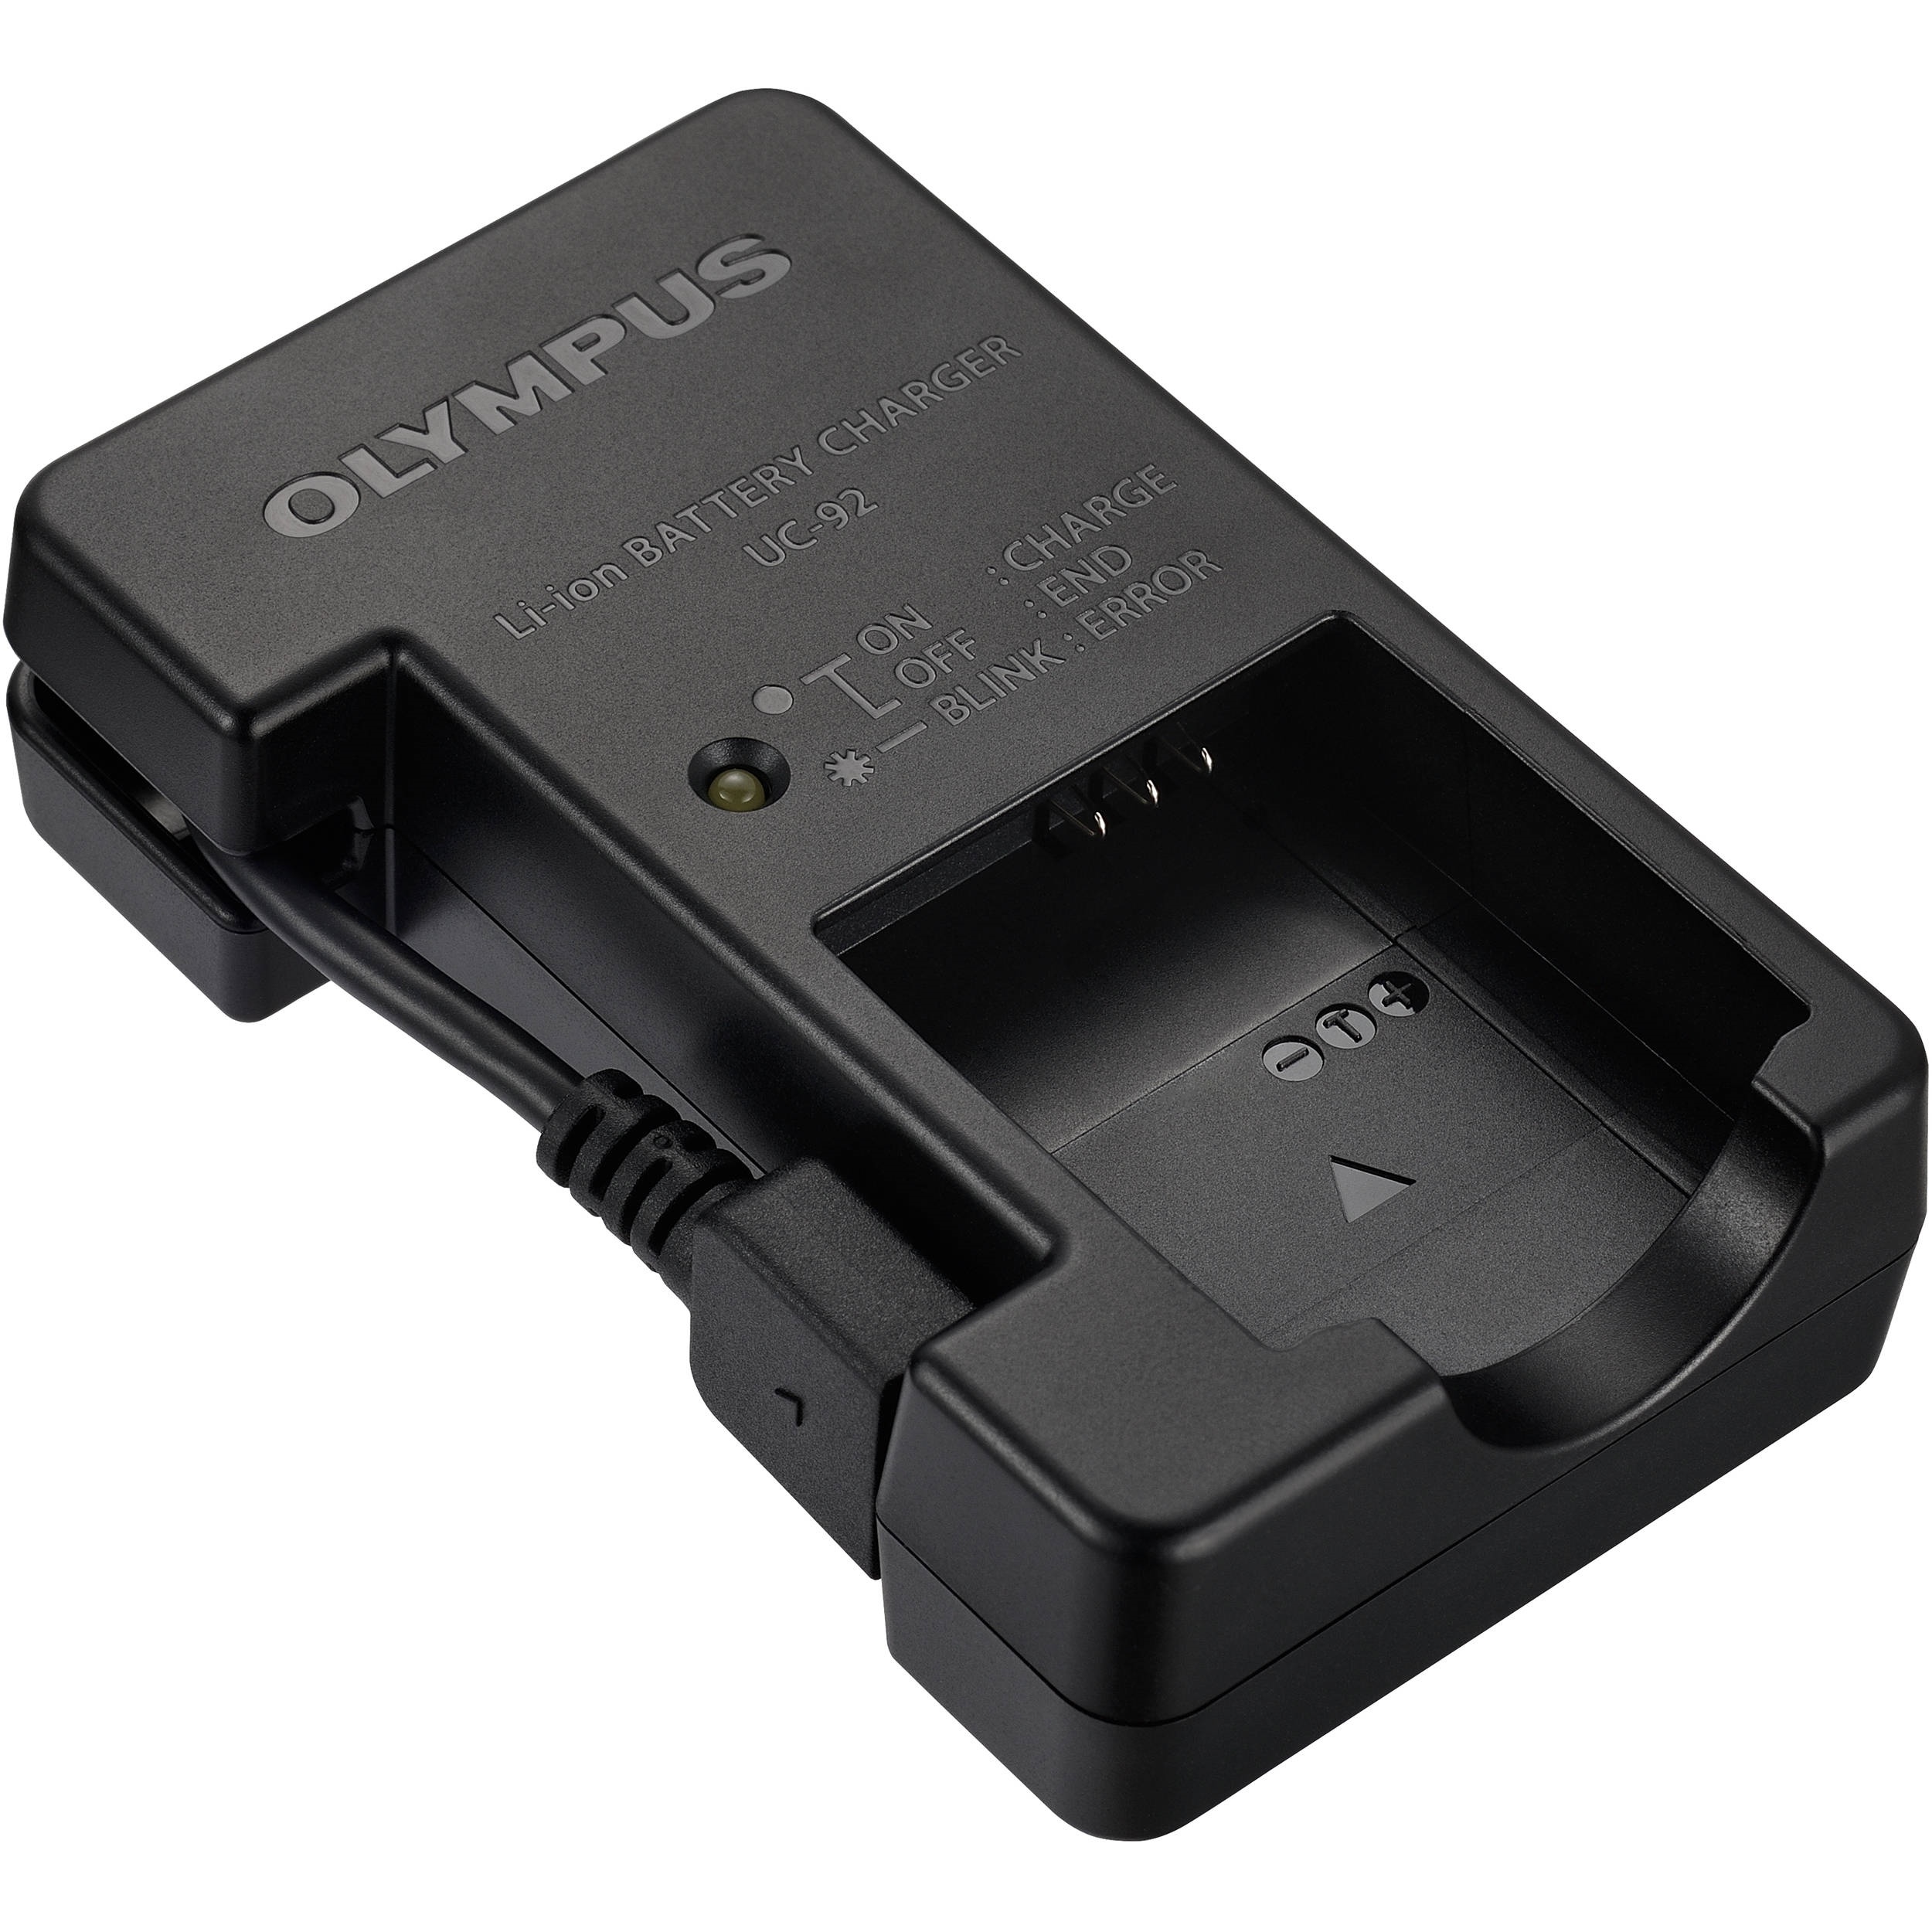 Olympus UC-92 External Battery Charger